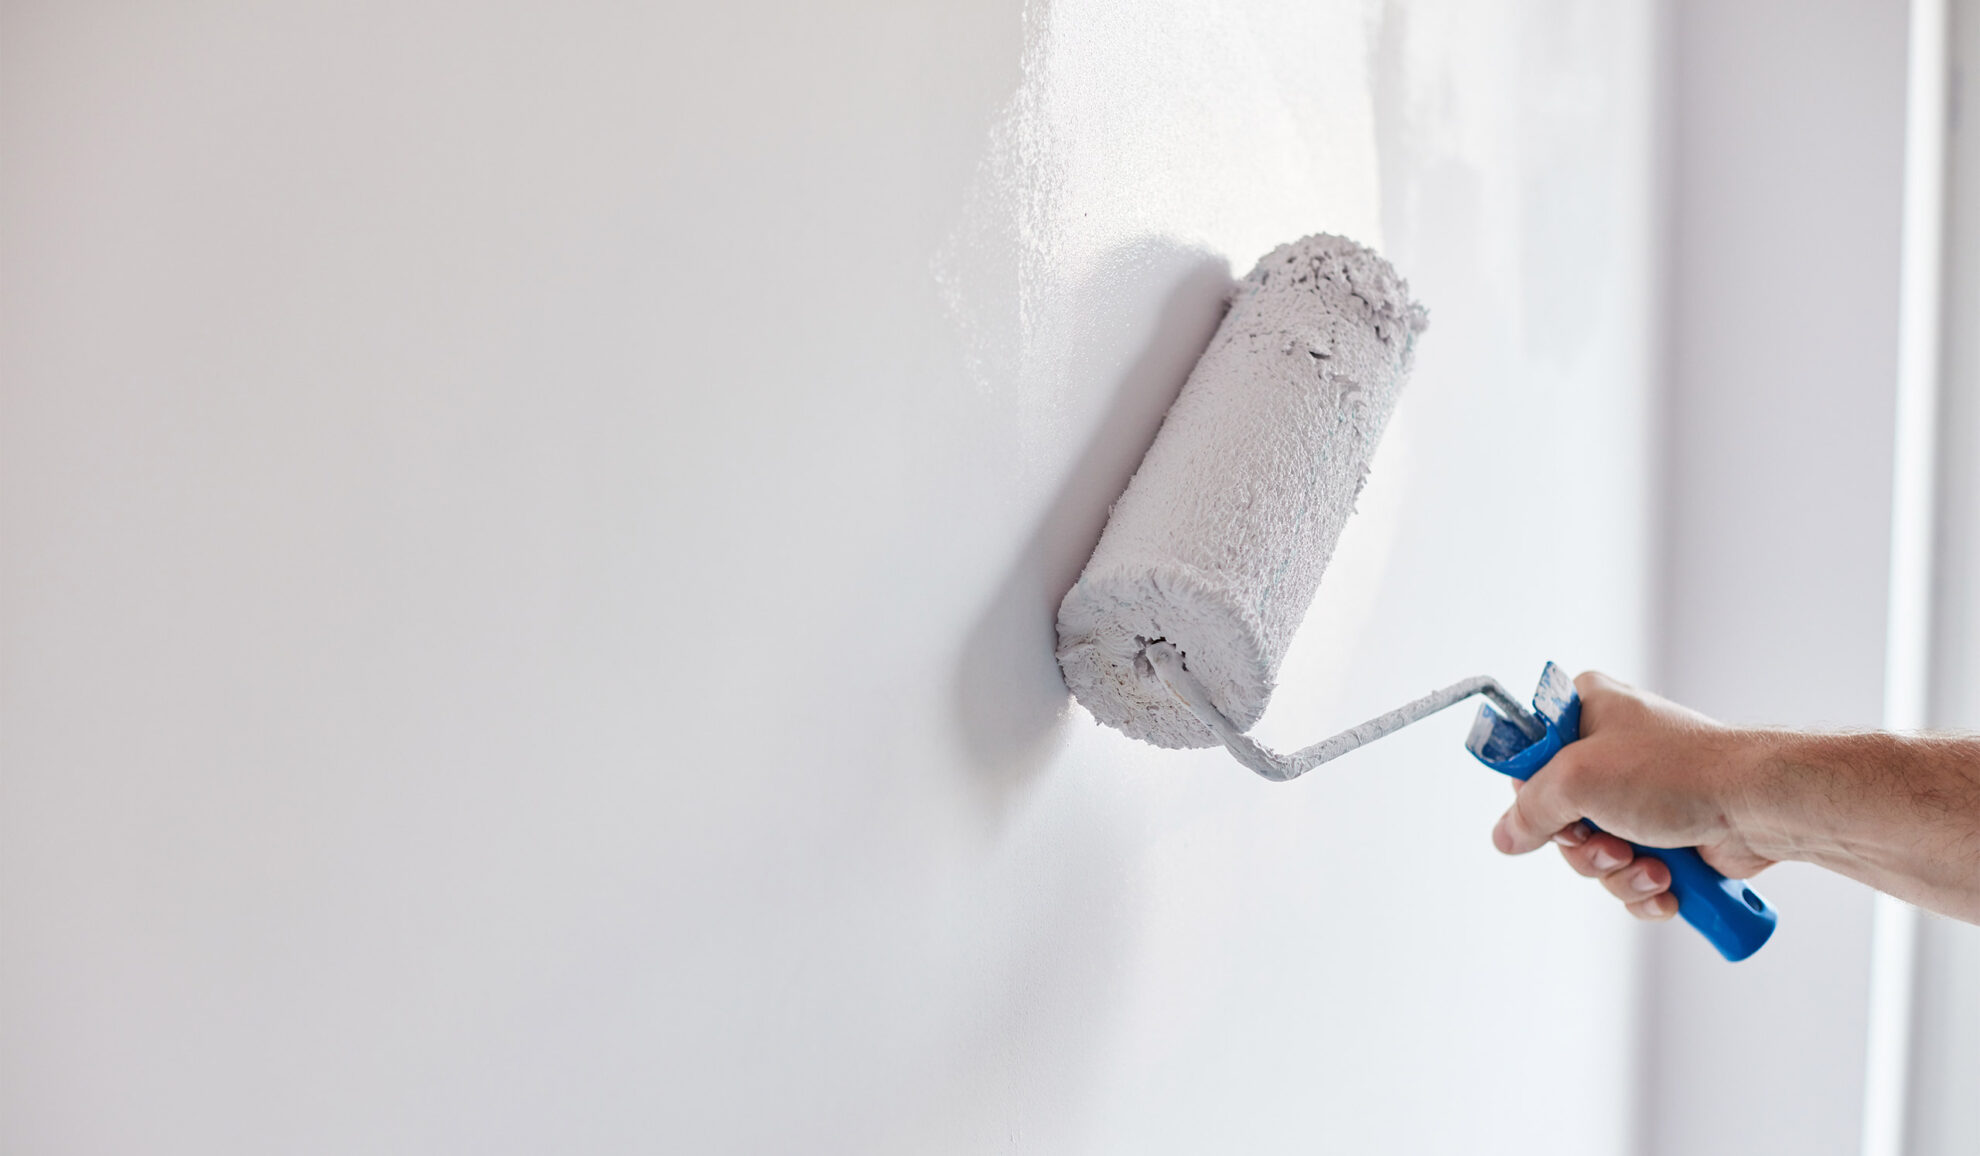 contractor hand close up painting interior white wall with paint roller bellbrook oh